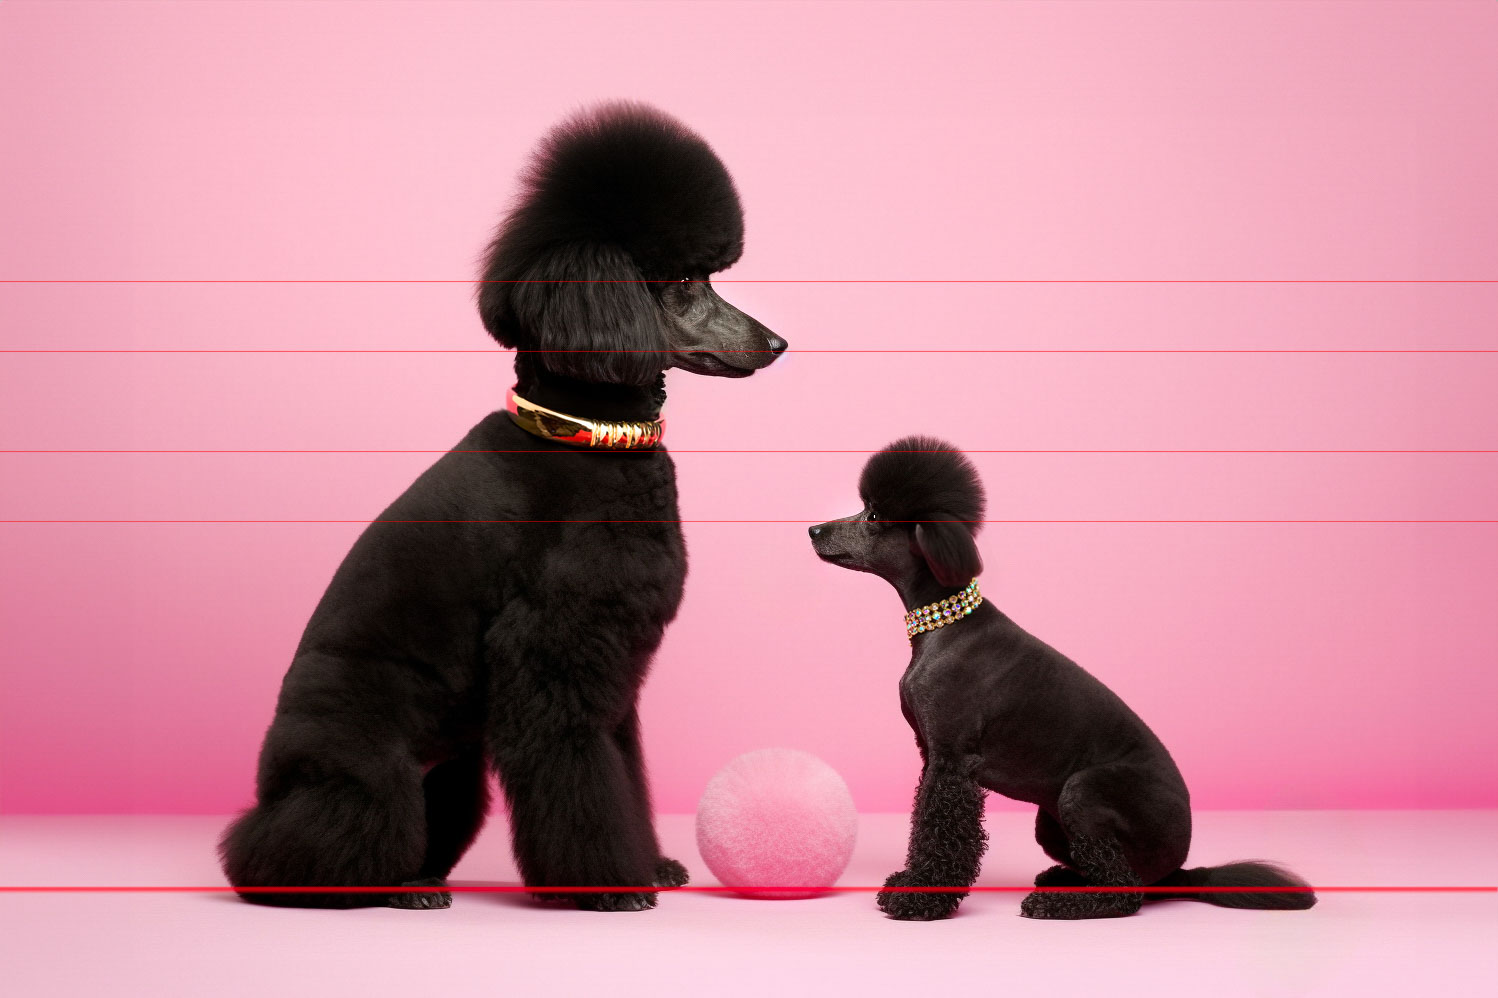 Black Standard & Toy Poodles Face Off Over Shaggy Pink Ball